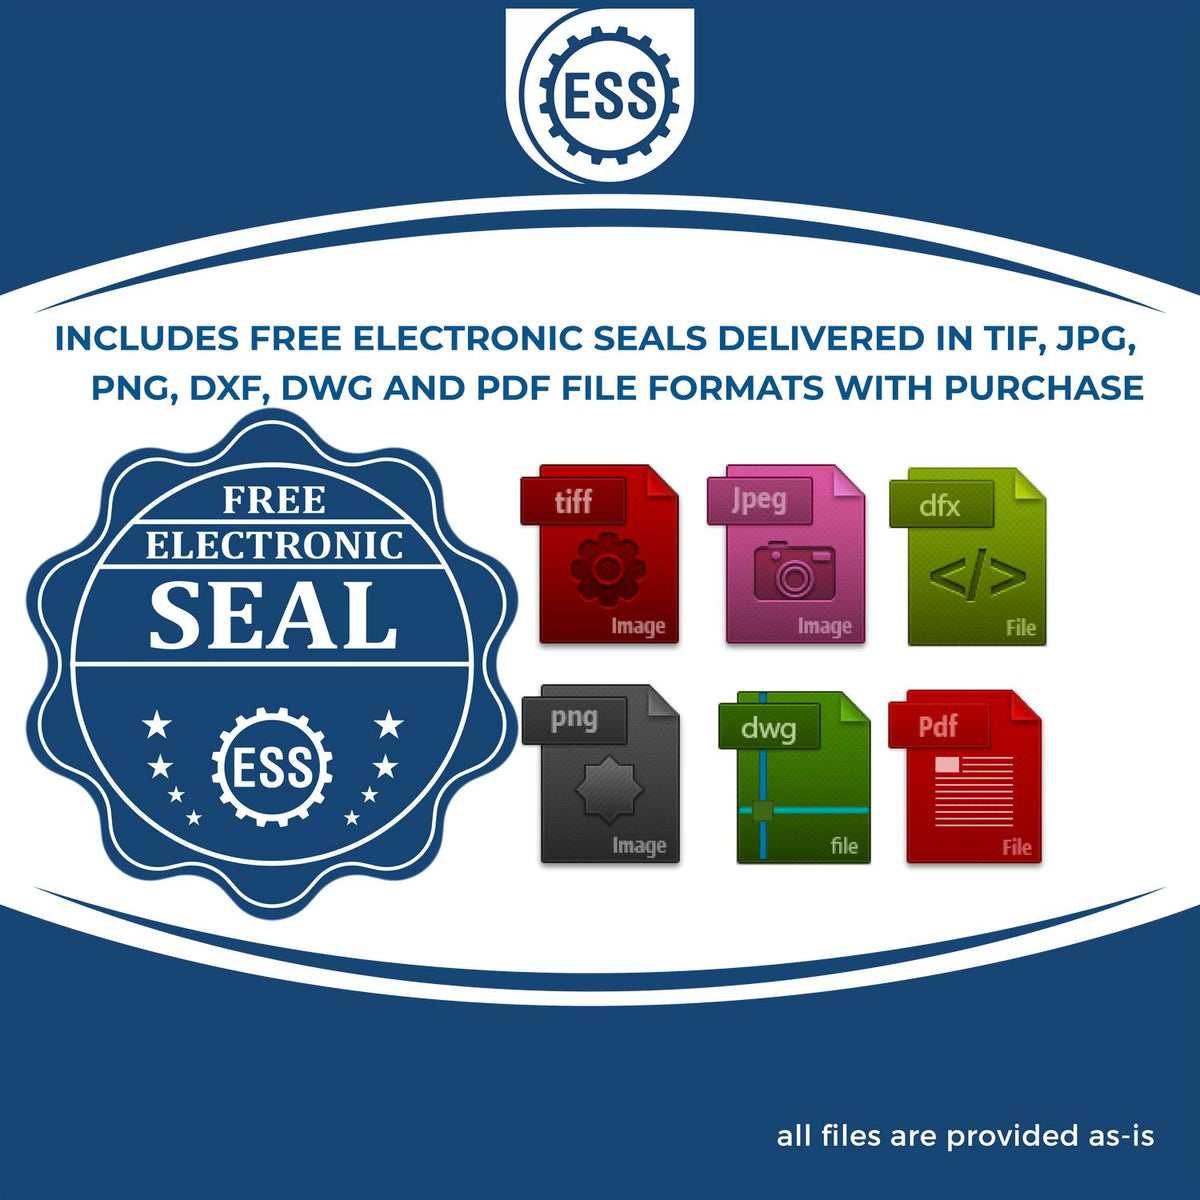 An infographic for the free electronic seal for the Soft Alaska Professional Geologist Seal illustrating the different file type icons such as DXF, DWG, TIF, JPG and PNG.